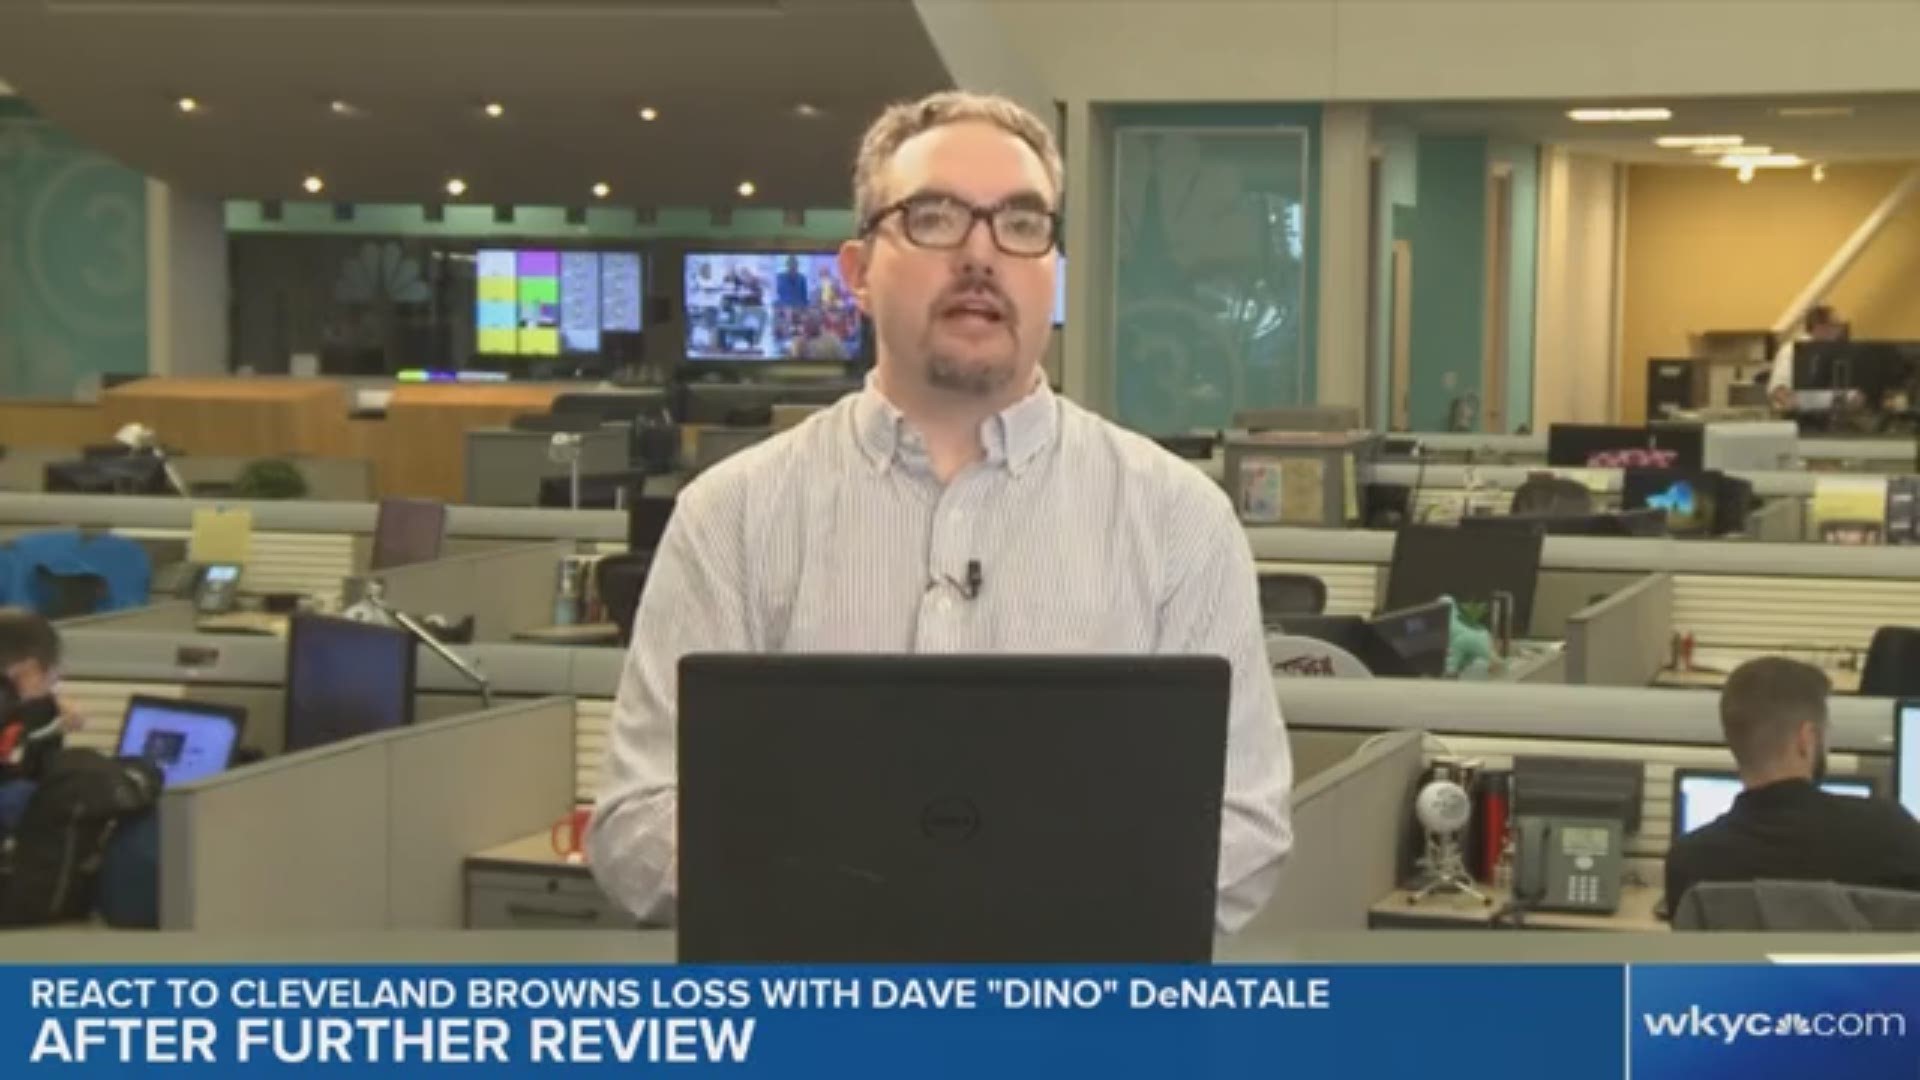 Dave DeNatale breaks down the Cleveland Browns' season-opening loss to the Tennessee Titans with the help of Jim Donovan, Ben Axelrod and viewer questions.